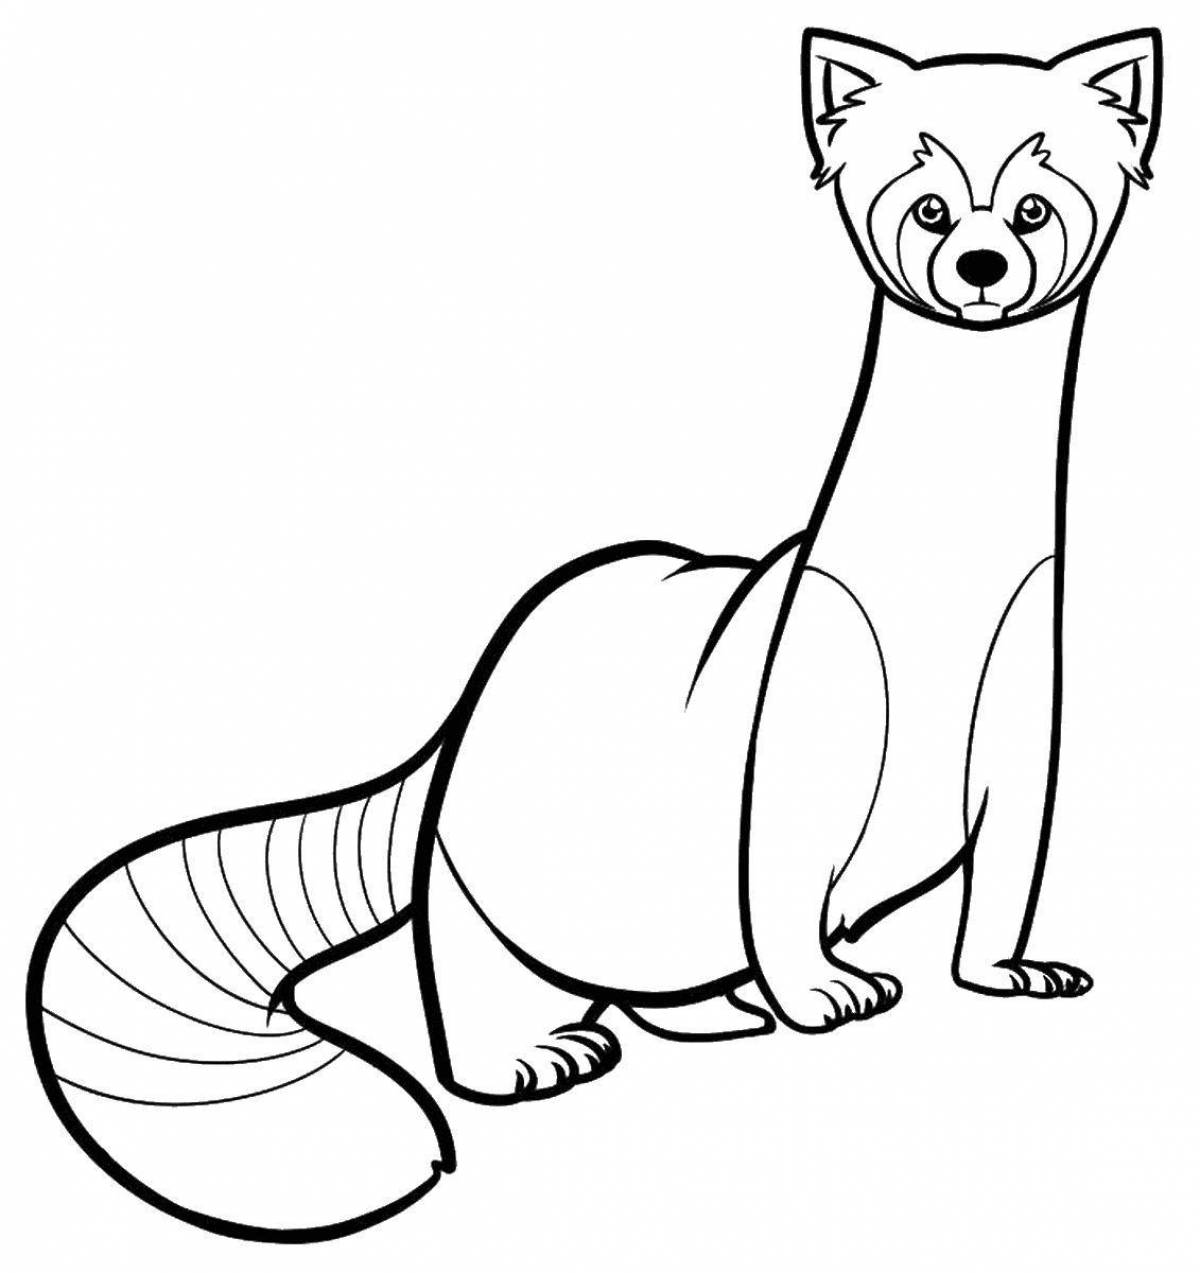 Bright mongoose coloring page